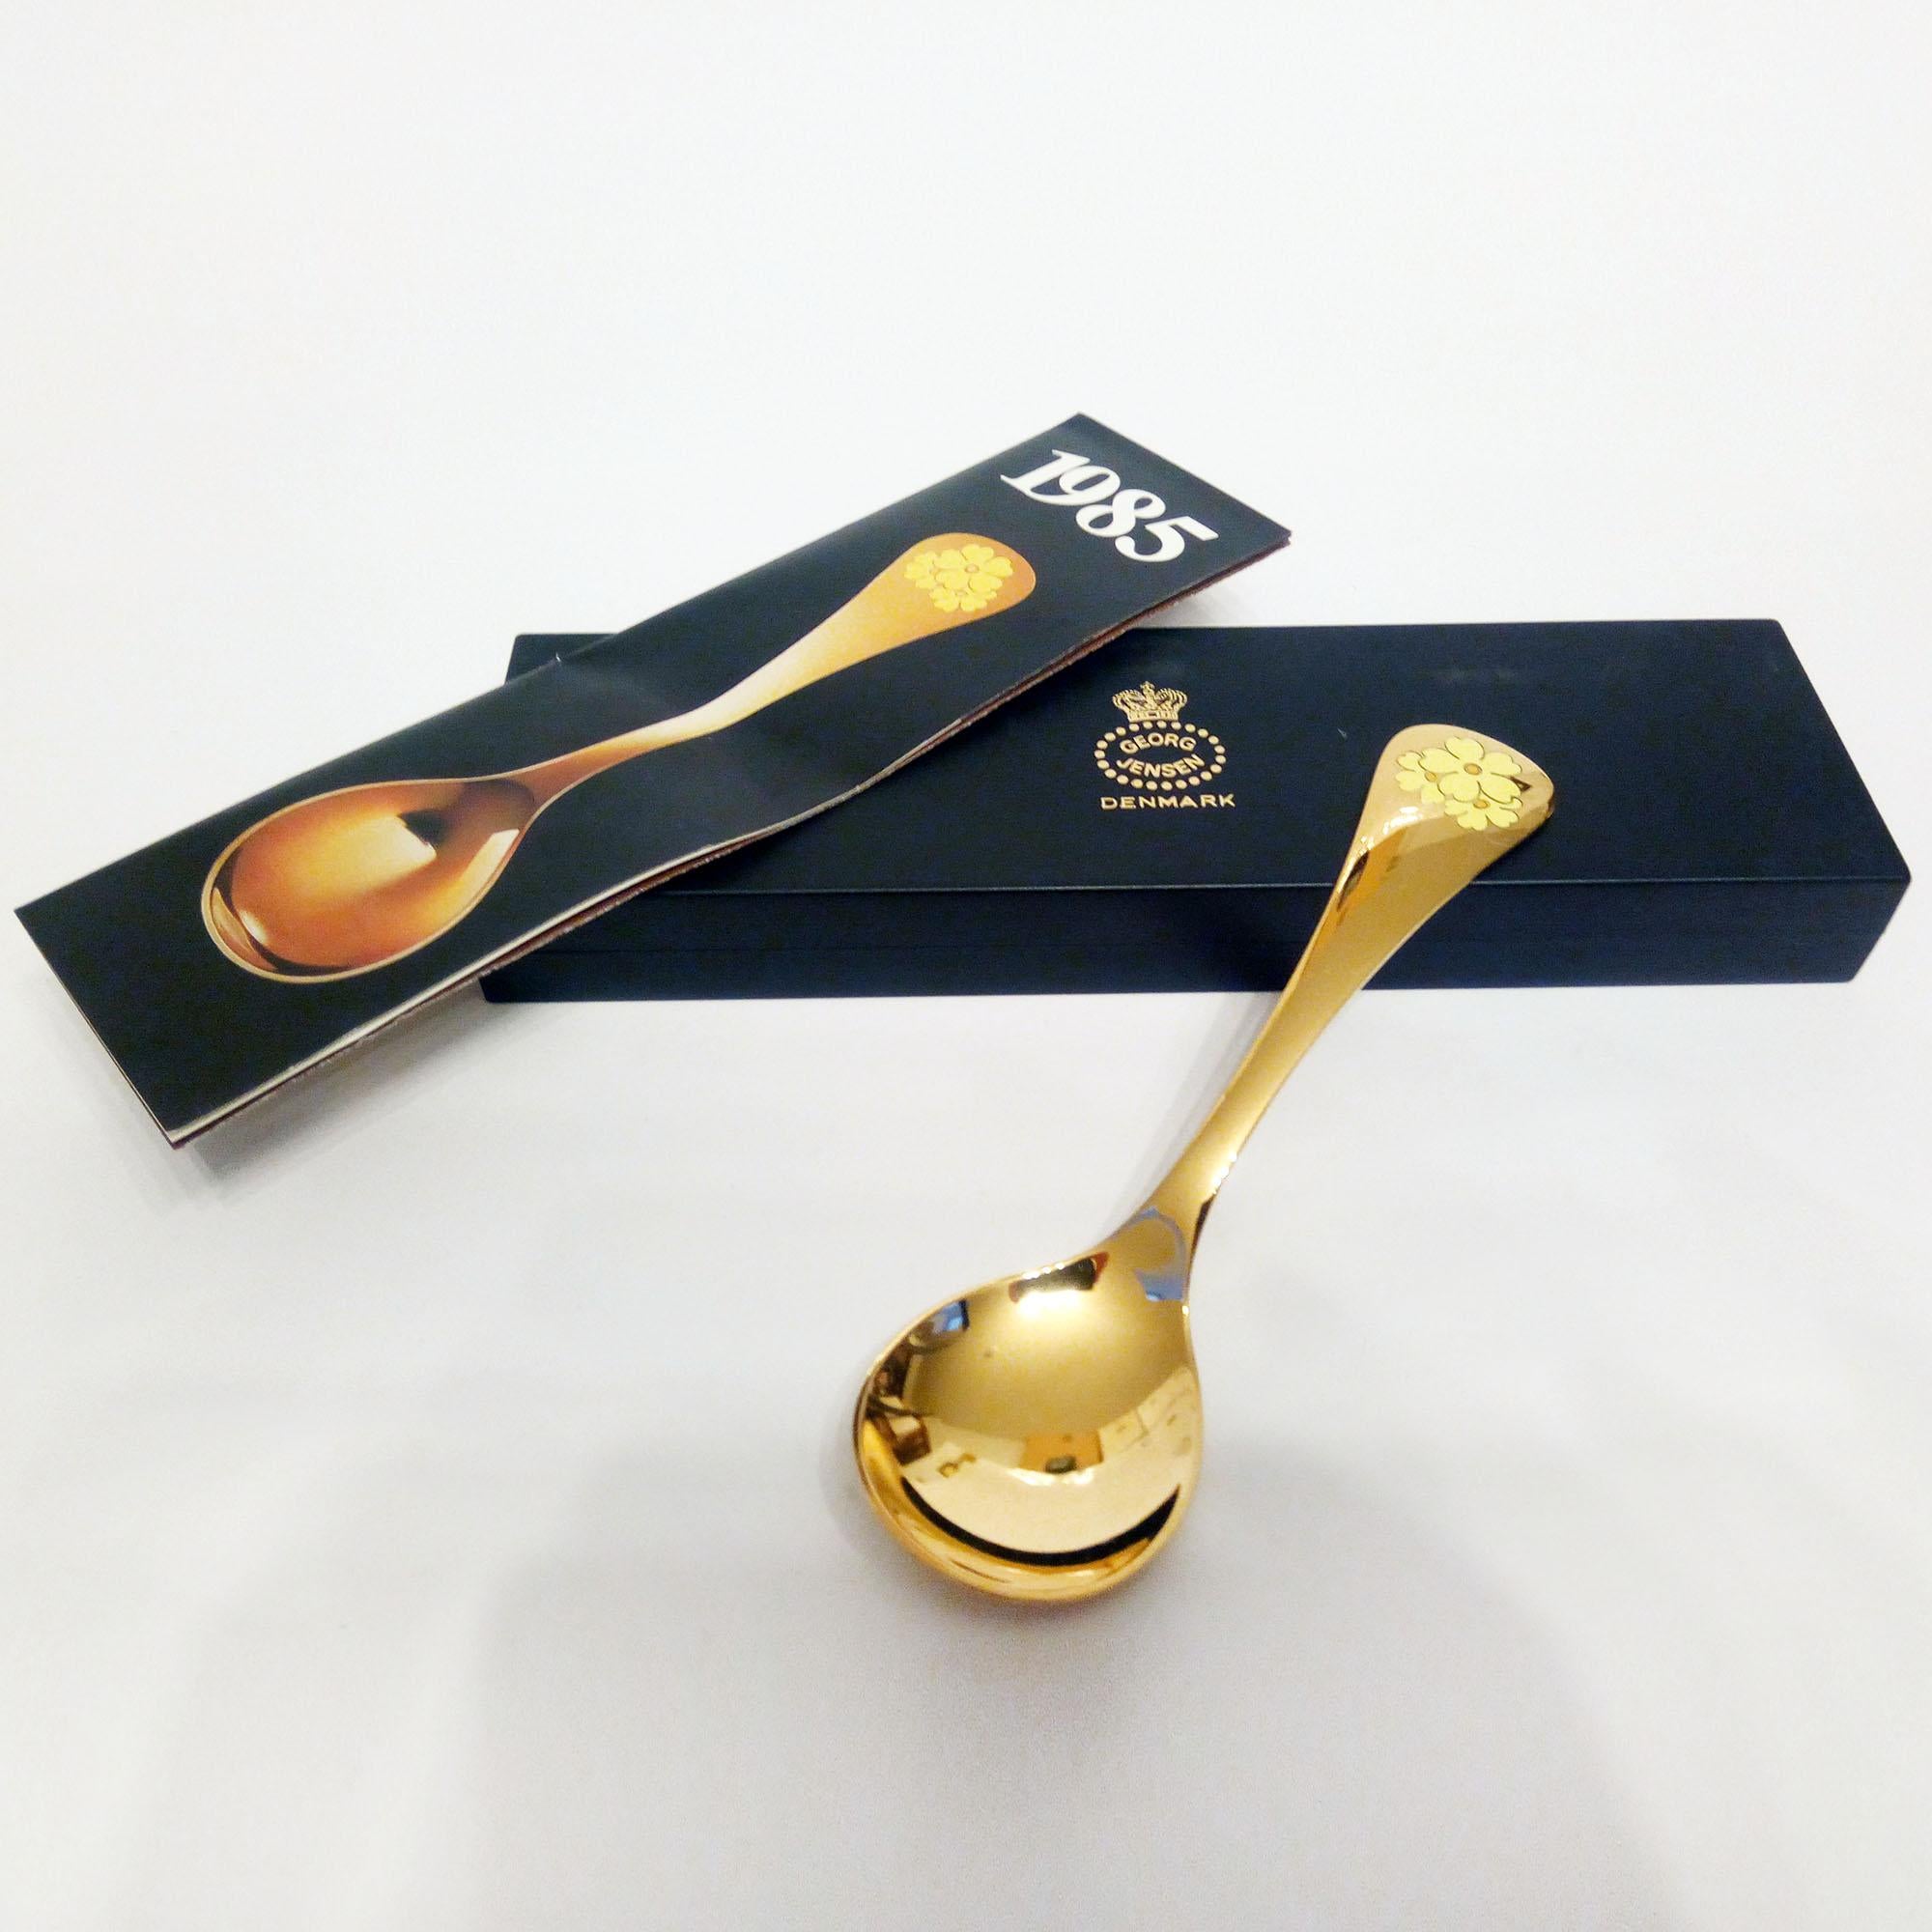 Annual spoon 1985 in original box, designed by Annelise Björner, edited by Georg Jensen.
Annual spoons series began in 1971. Each spoon is crafted in sterling silver, then gold plated and enameled with a wildflower chosen for that year. The 1985